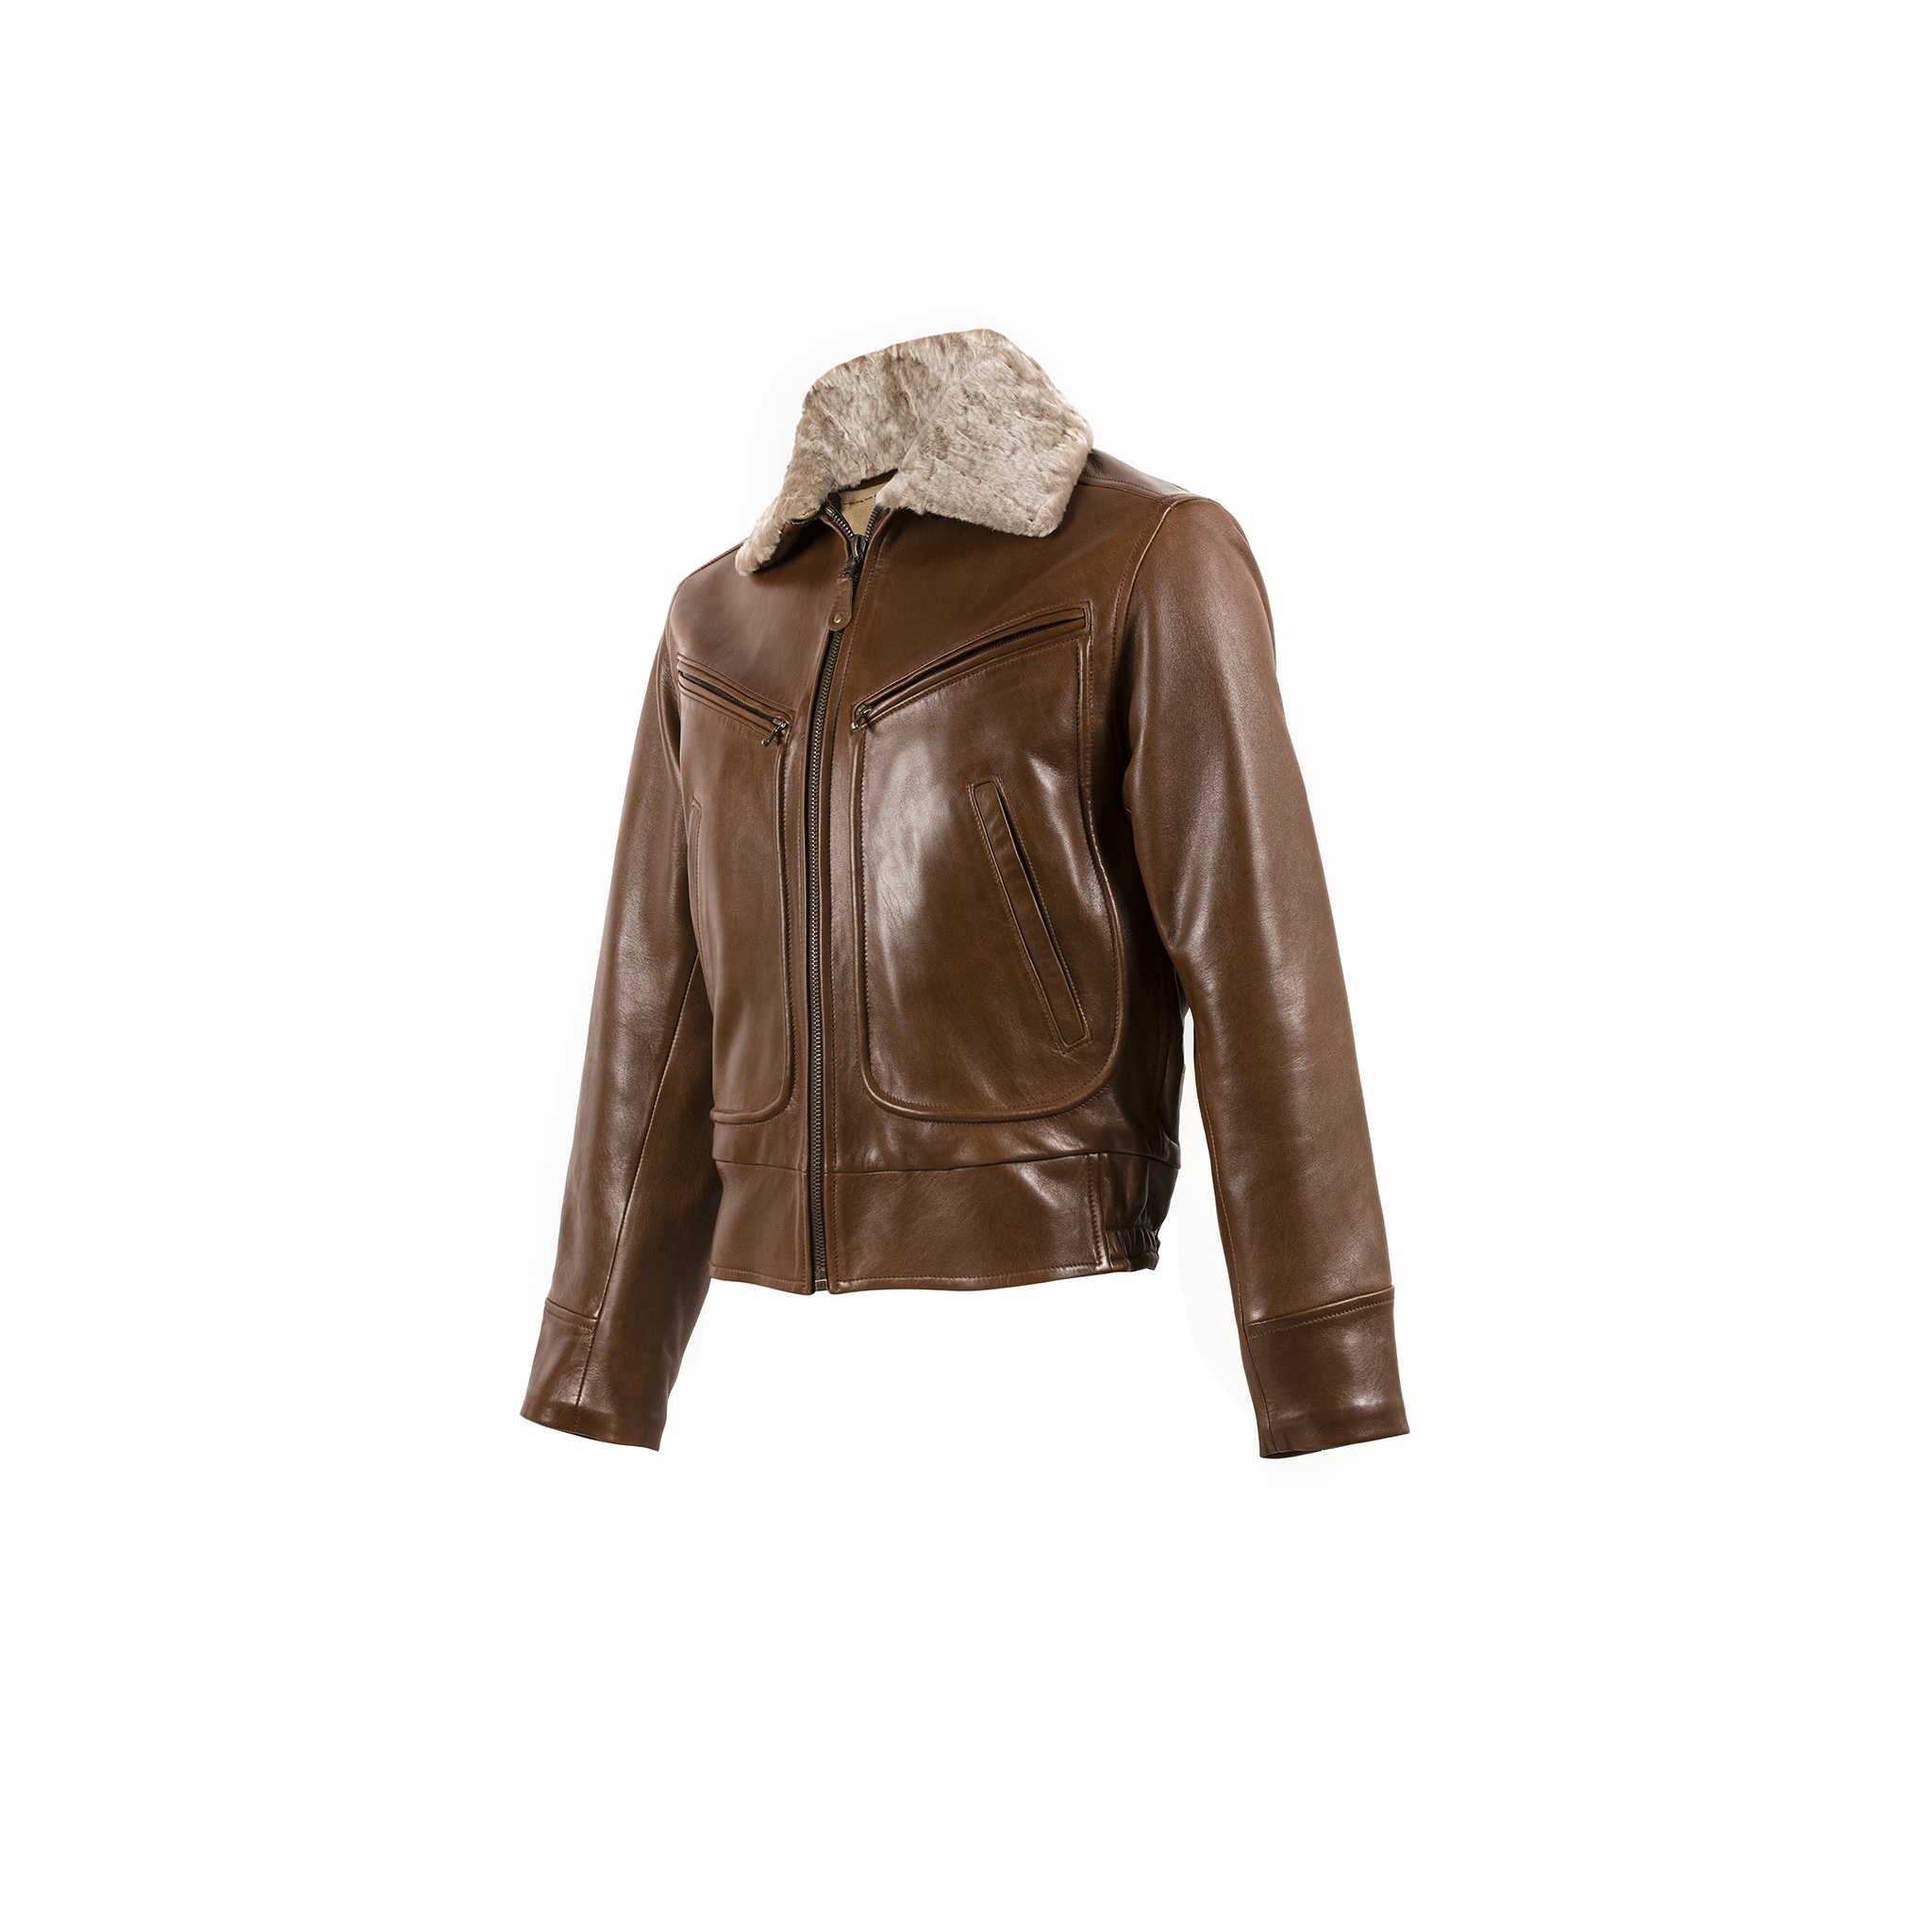 Roadster Jacket - Glossy leather - Brown color